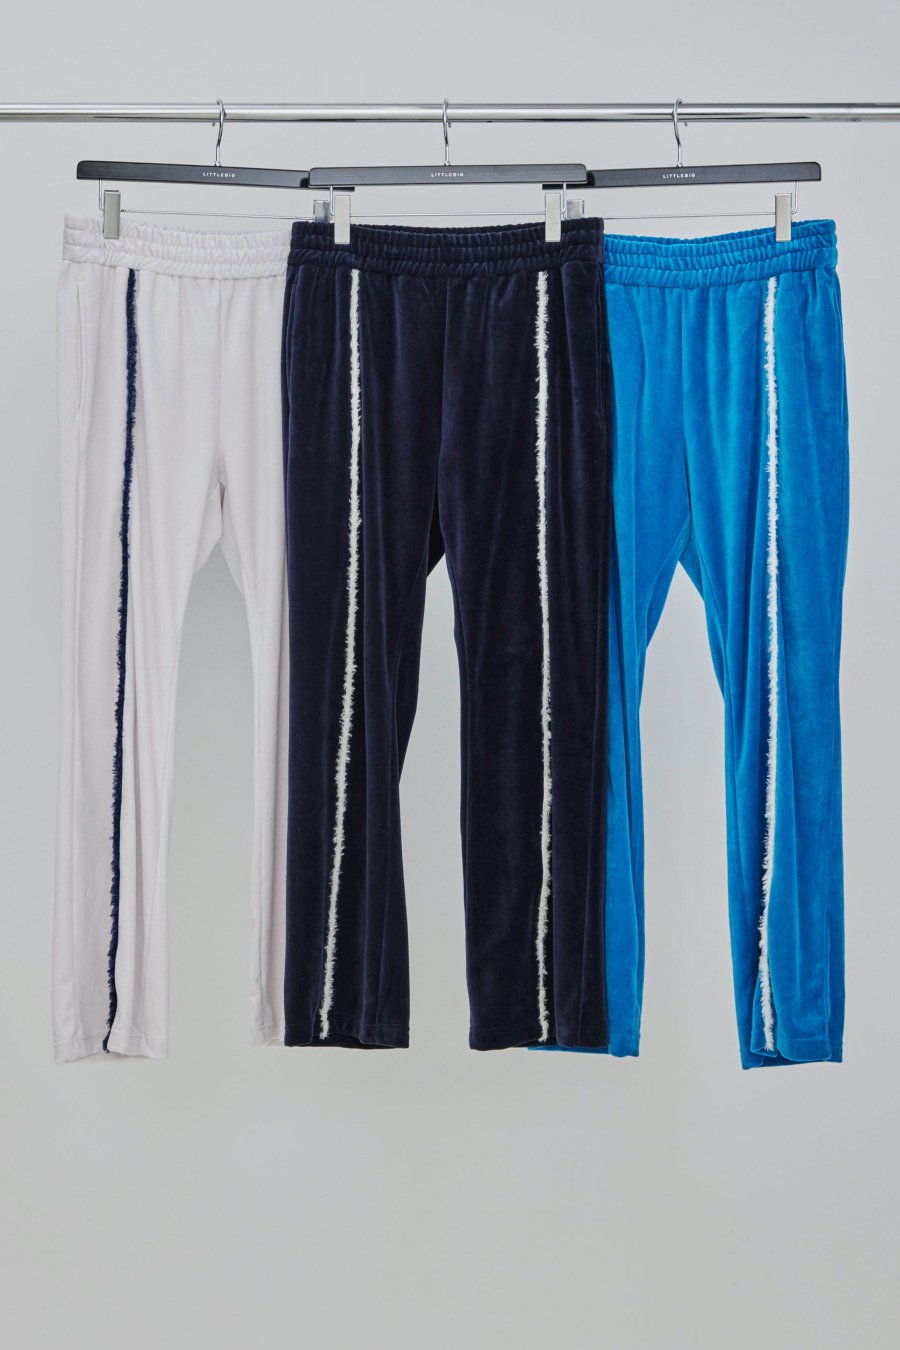 LITTLEBIG  Track Pants(Navy)
<img class='new_mark_img2' src='https://img.shop-pro.jp/img/new/icons15.gif' style='border:none;display:inline;margin:0px;padding:0px;width:auto;' />